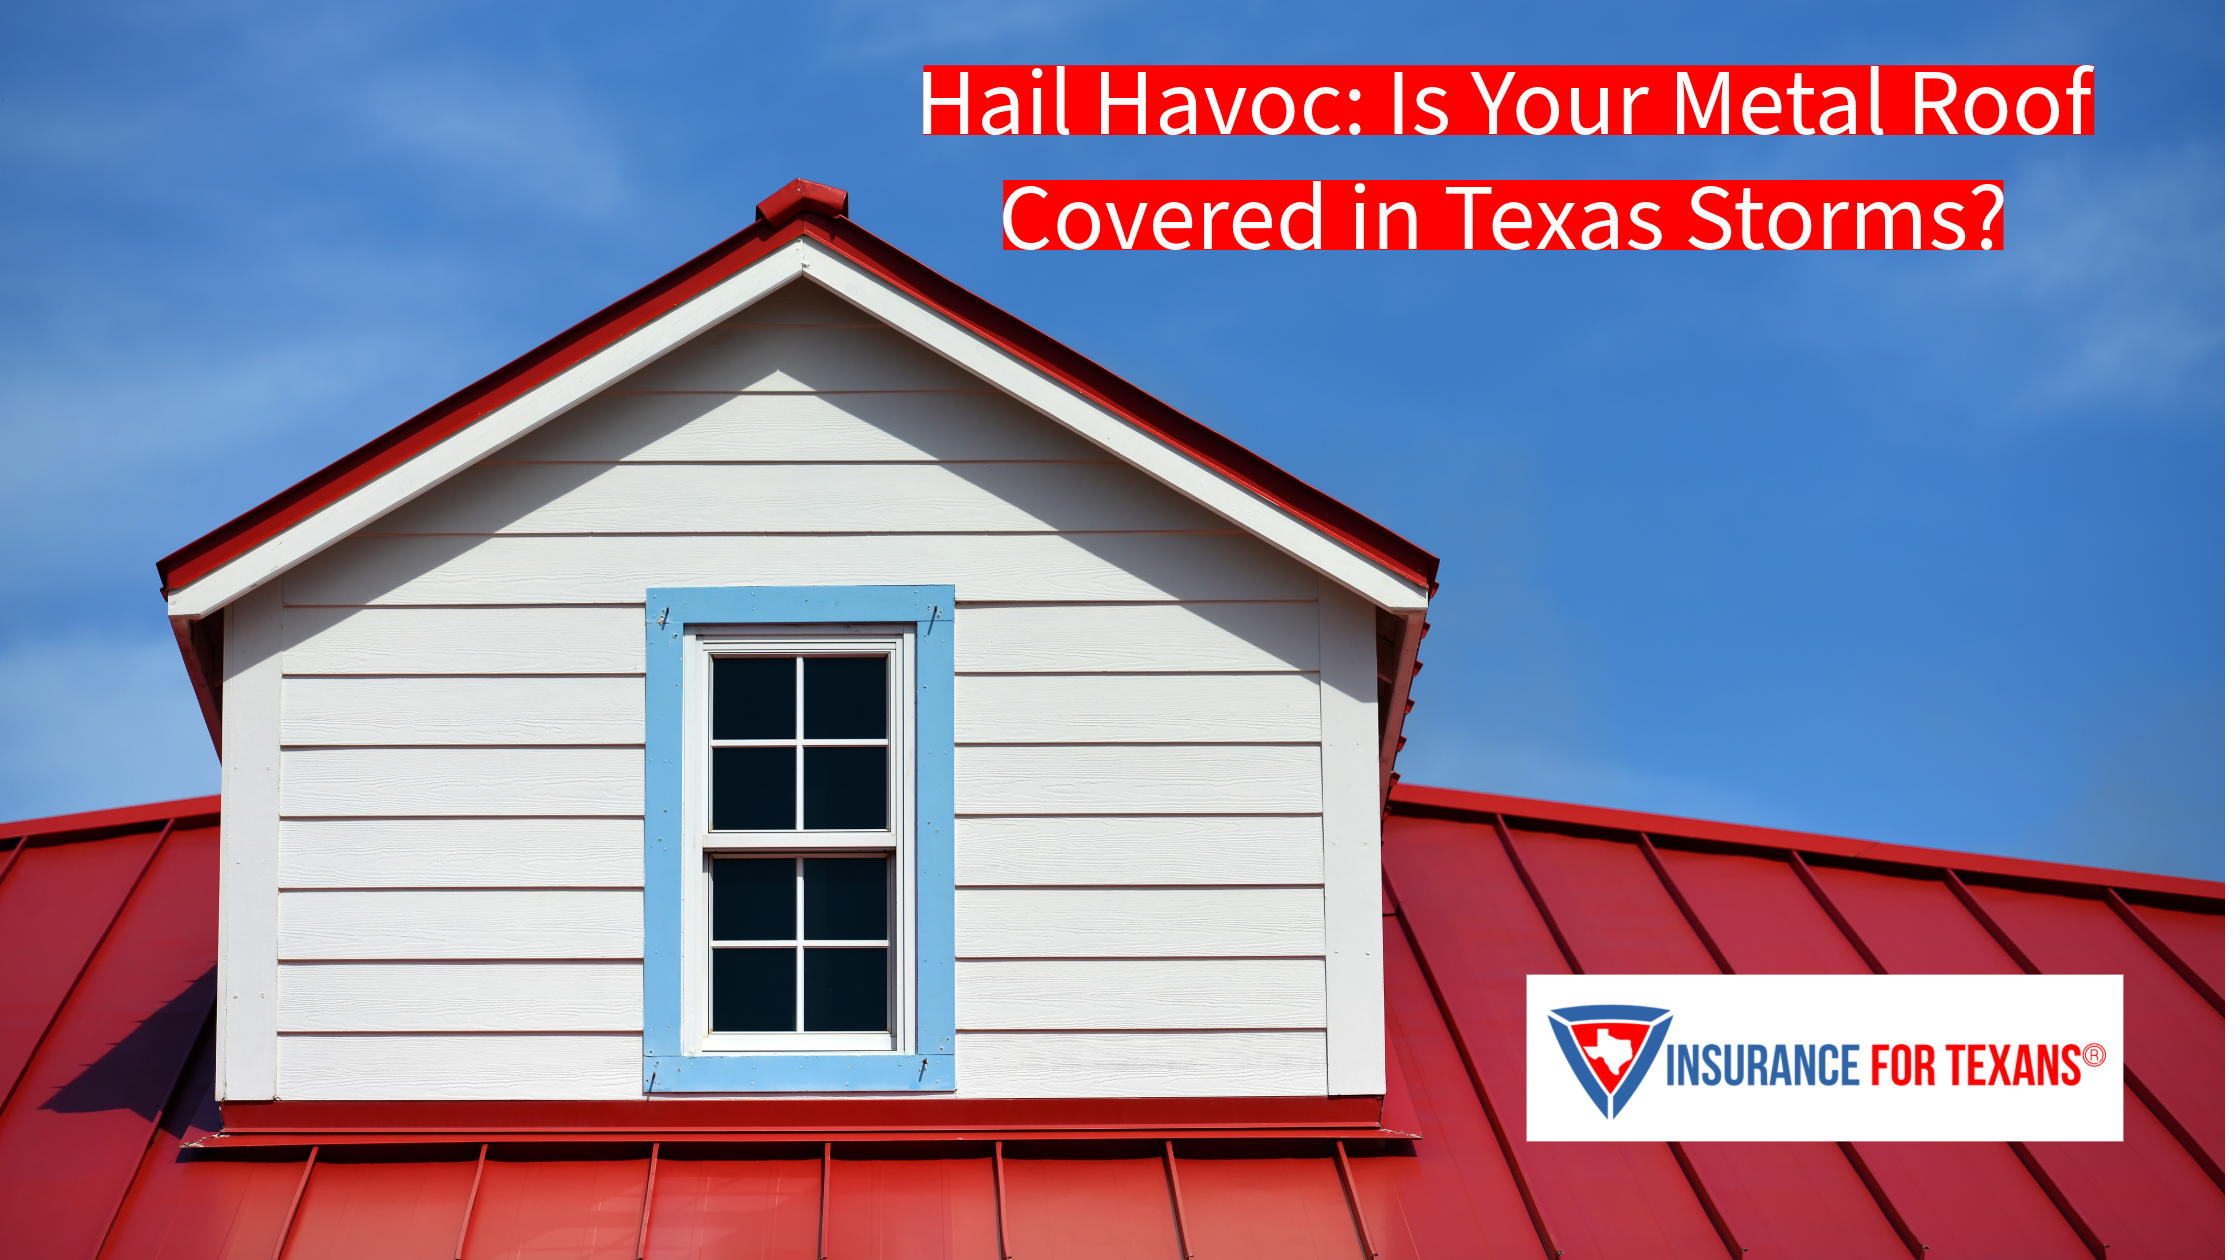 Hail Havoc: Is Your Metal Roof Covered in Texas Storms?